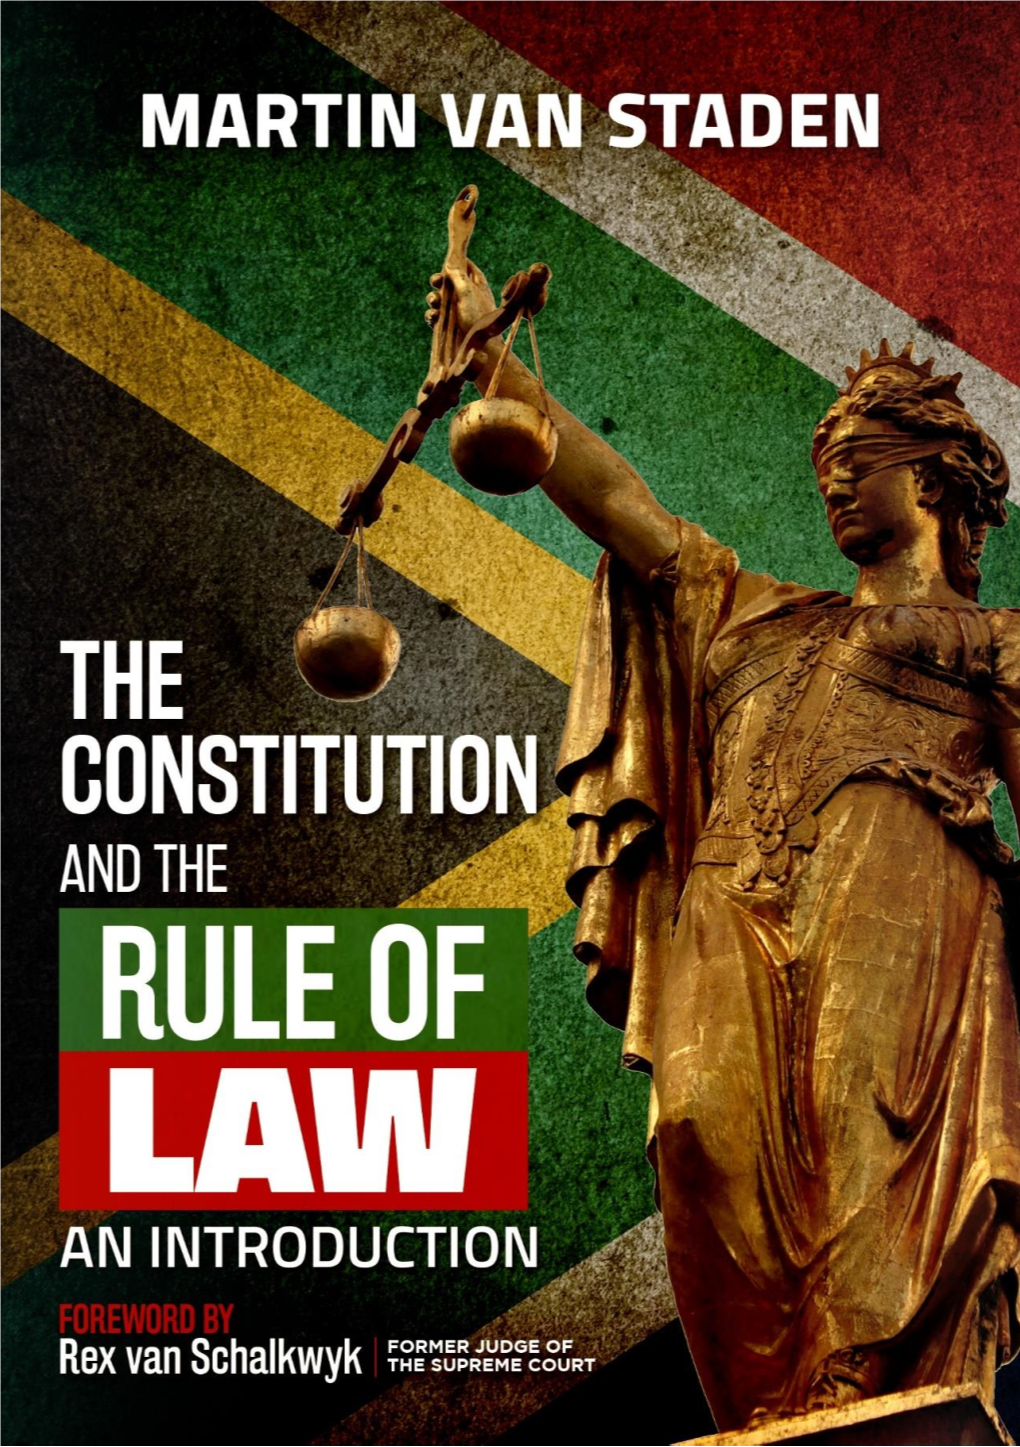 What Is the Rule of Law?